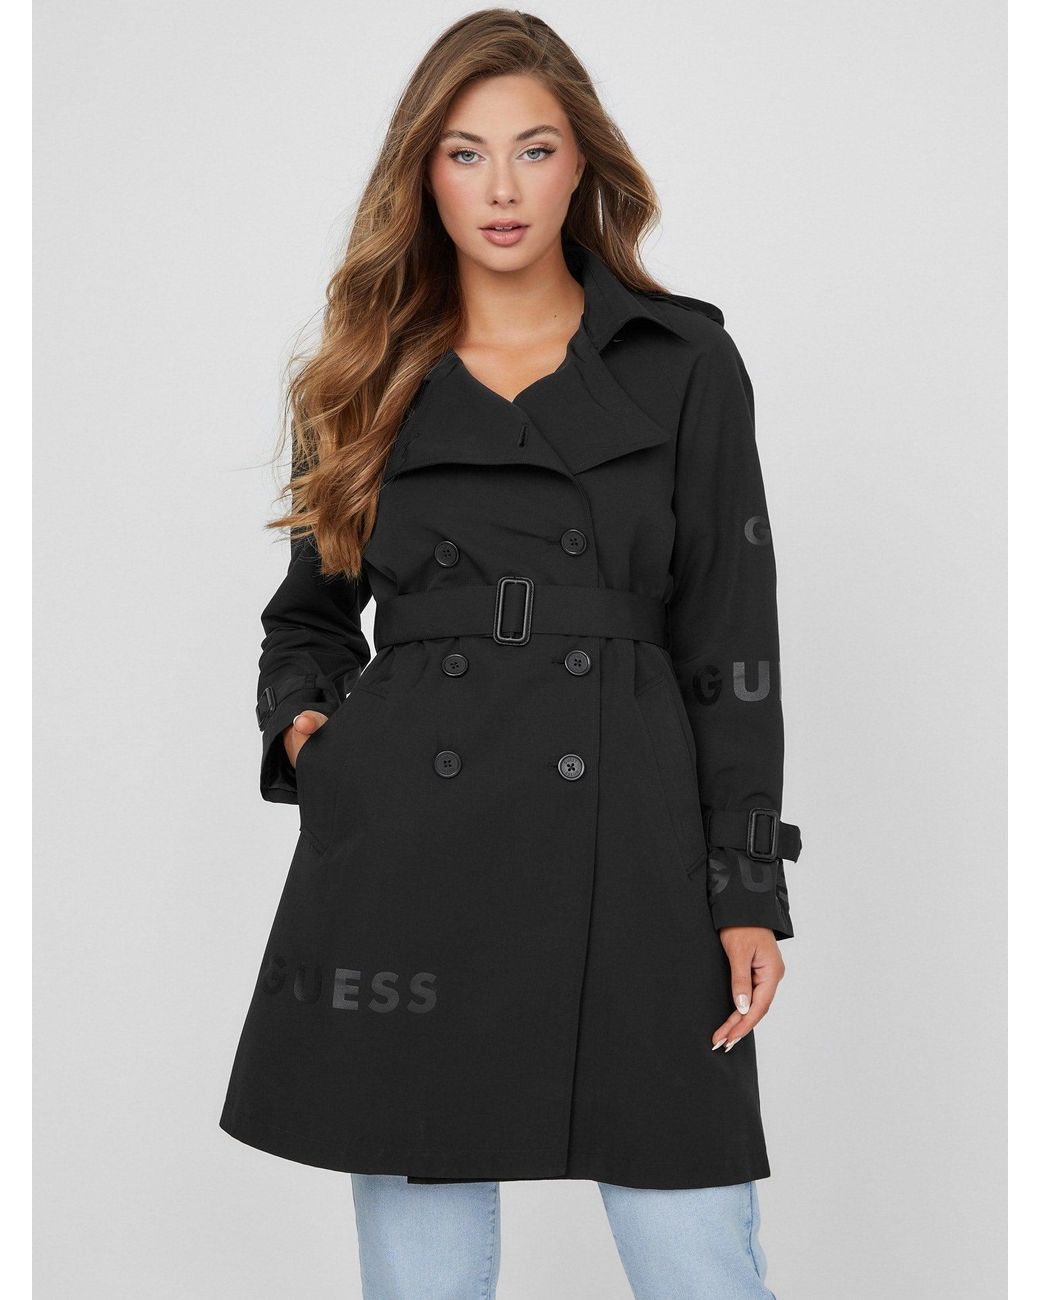 Guess Factory Madge Trench Coat in Black | Lyst